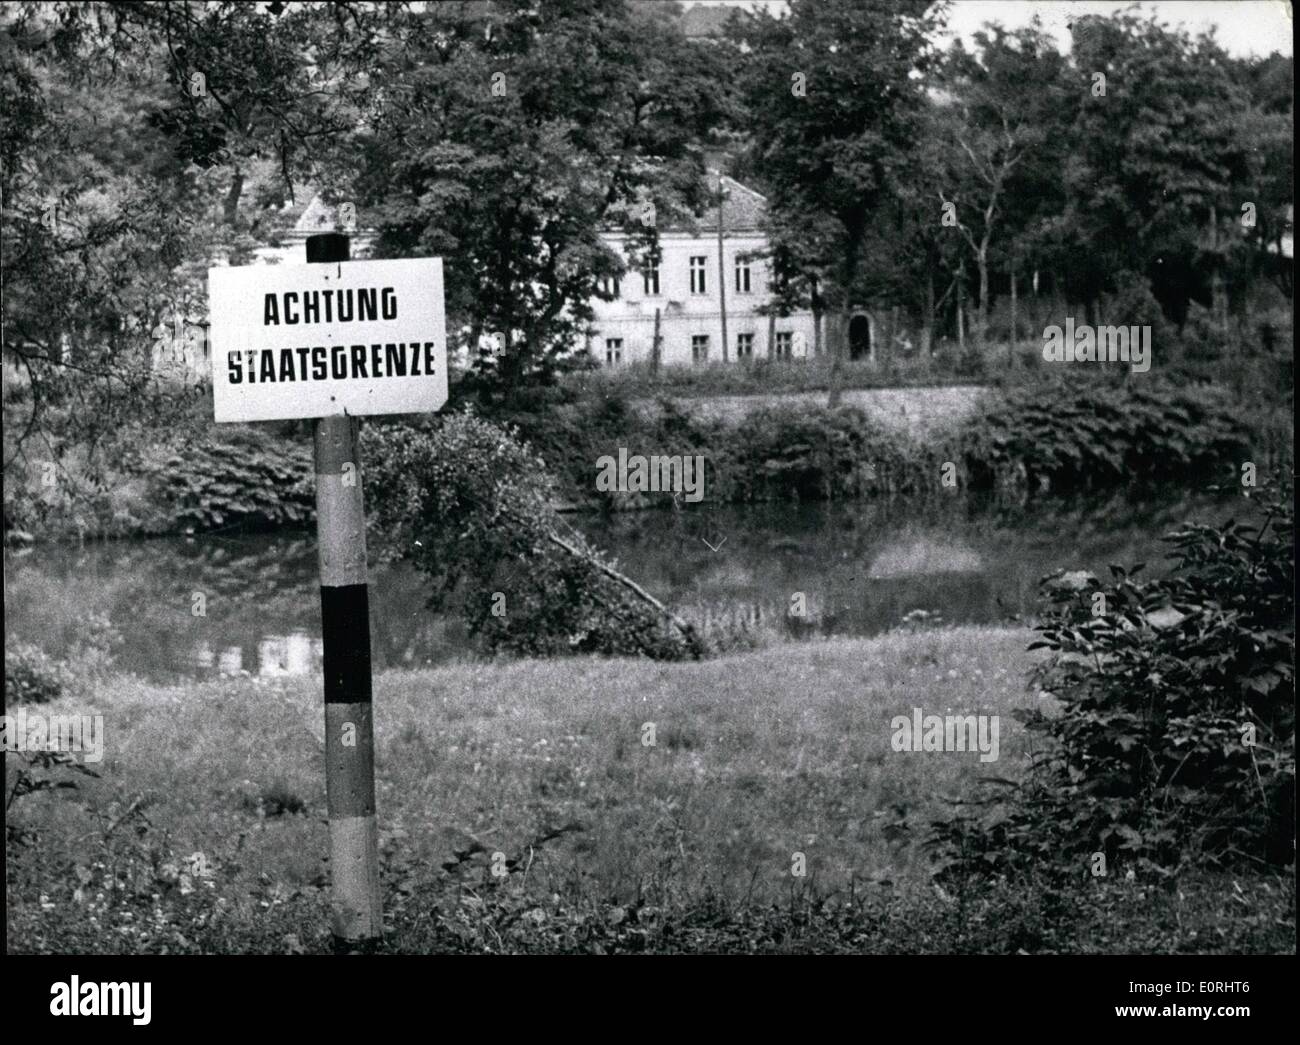 Sep. 09, 1959 - Oder-Neisse-Border is ''Stateborder'': 20 years ago, on the 1st Sept. 1939, Poland was invaded by Hitler's SS. When the Russians set Poland free there was drawn a provisional border in 1945 between Germany and Poland; the ''German Democratic Republic'' and Poland made a ''stateborder'' of that. Photo shows was taken in Aug. 1959 at the Neisse near Gorlitz (GORLITZ). The sign in front is on german ground; the house on the other side of the river Neisse belongs already to Poland. Stock Photo